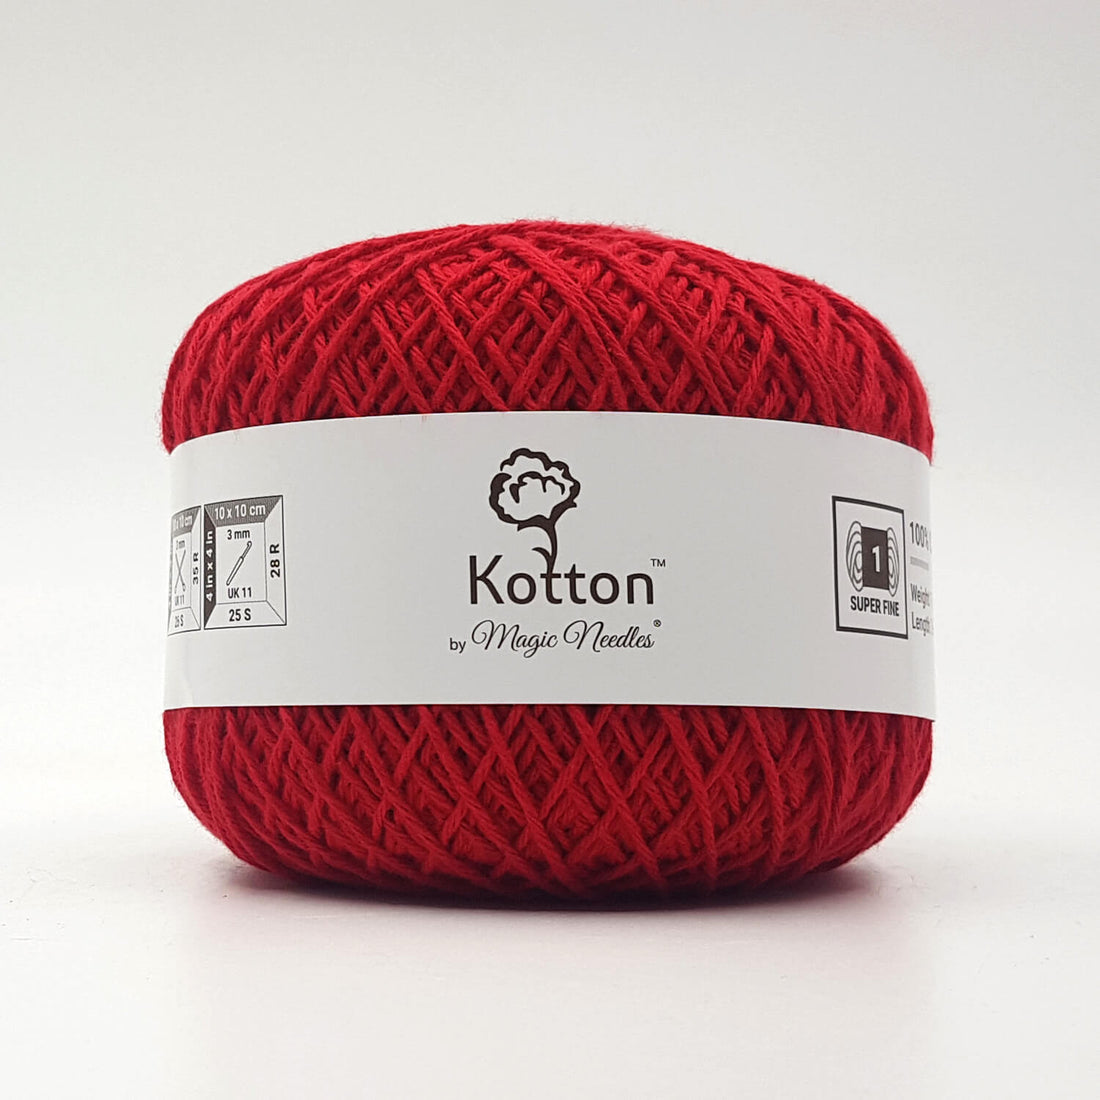 Discover Pure Comfort: Premium Cotton Yarns for Knitting and Crochet